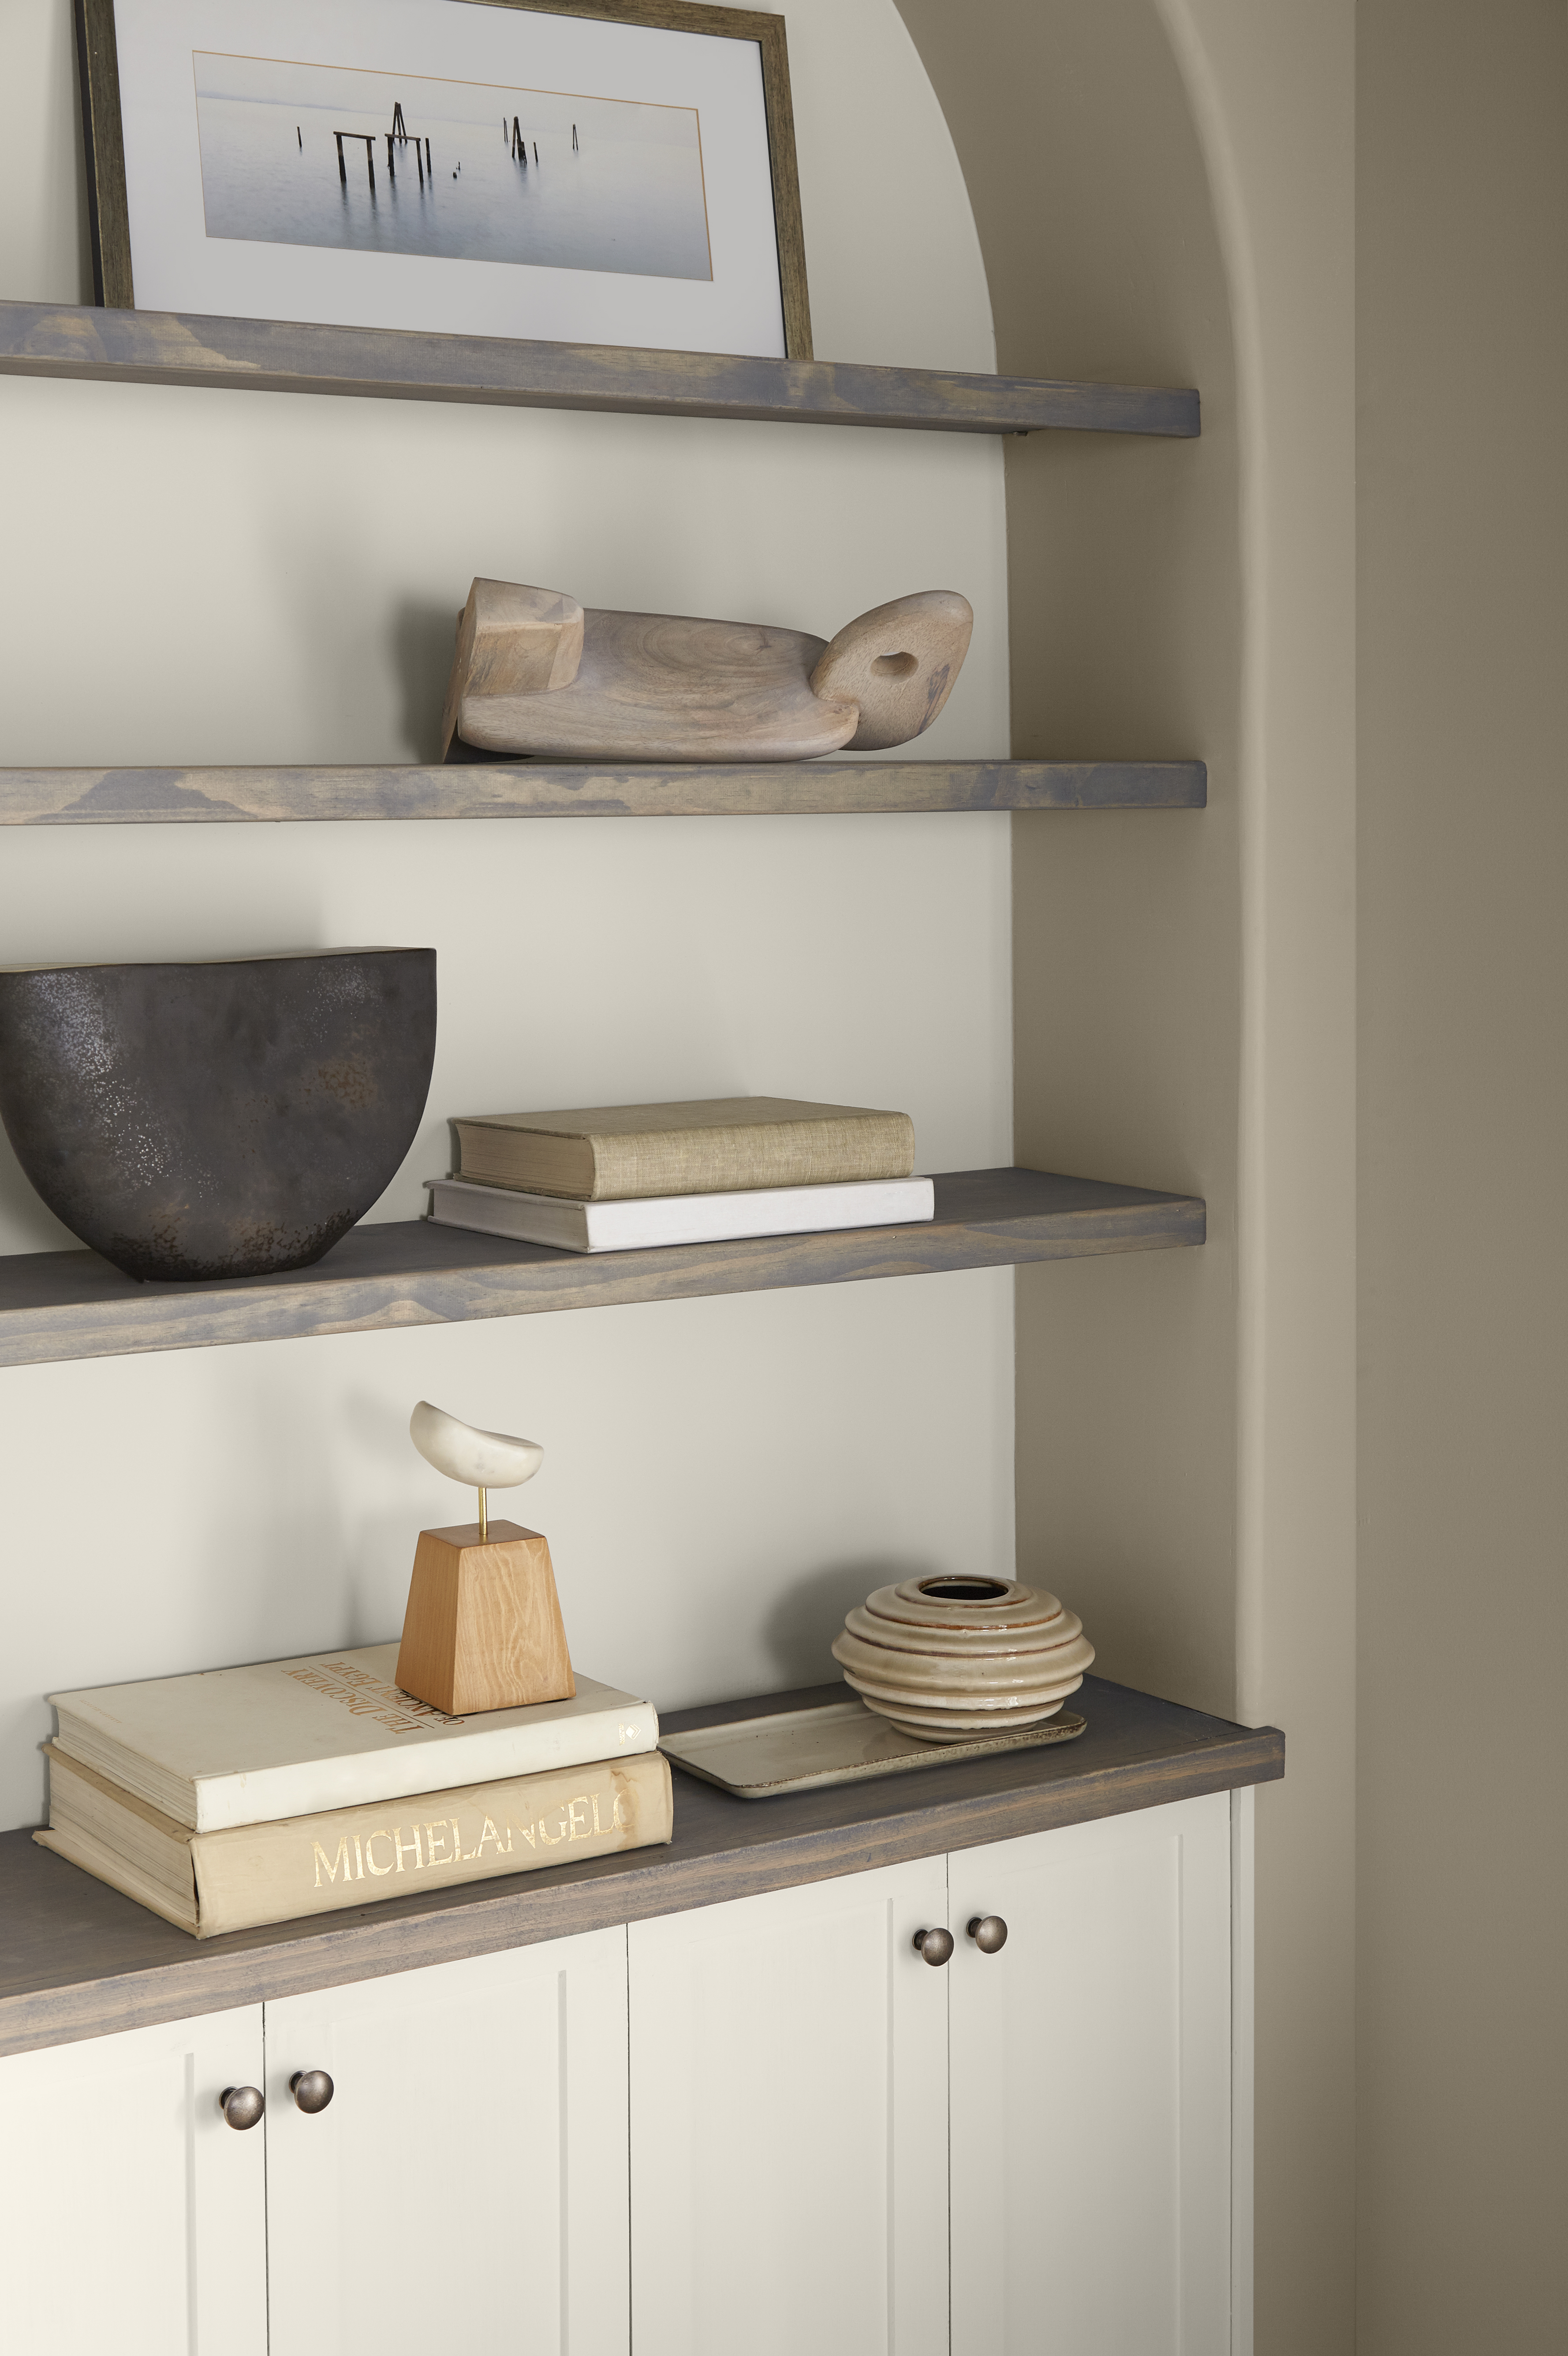 A closeup of built-in shelves painted in Even Better Beige.